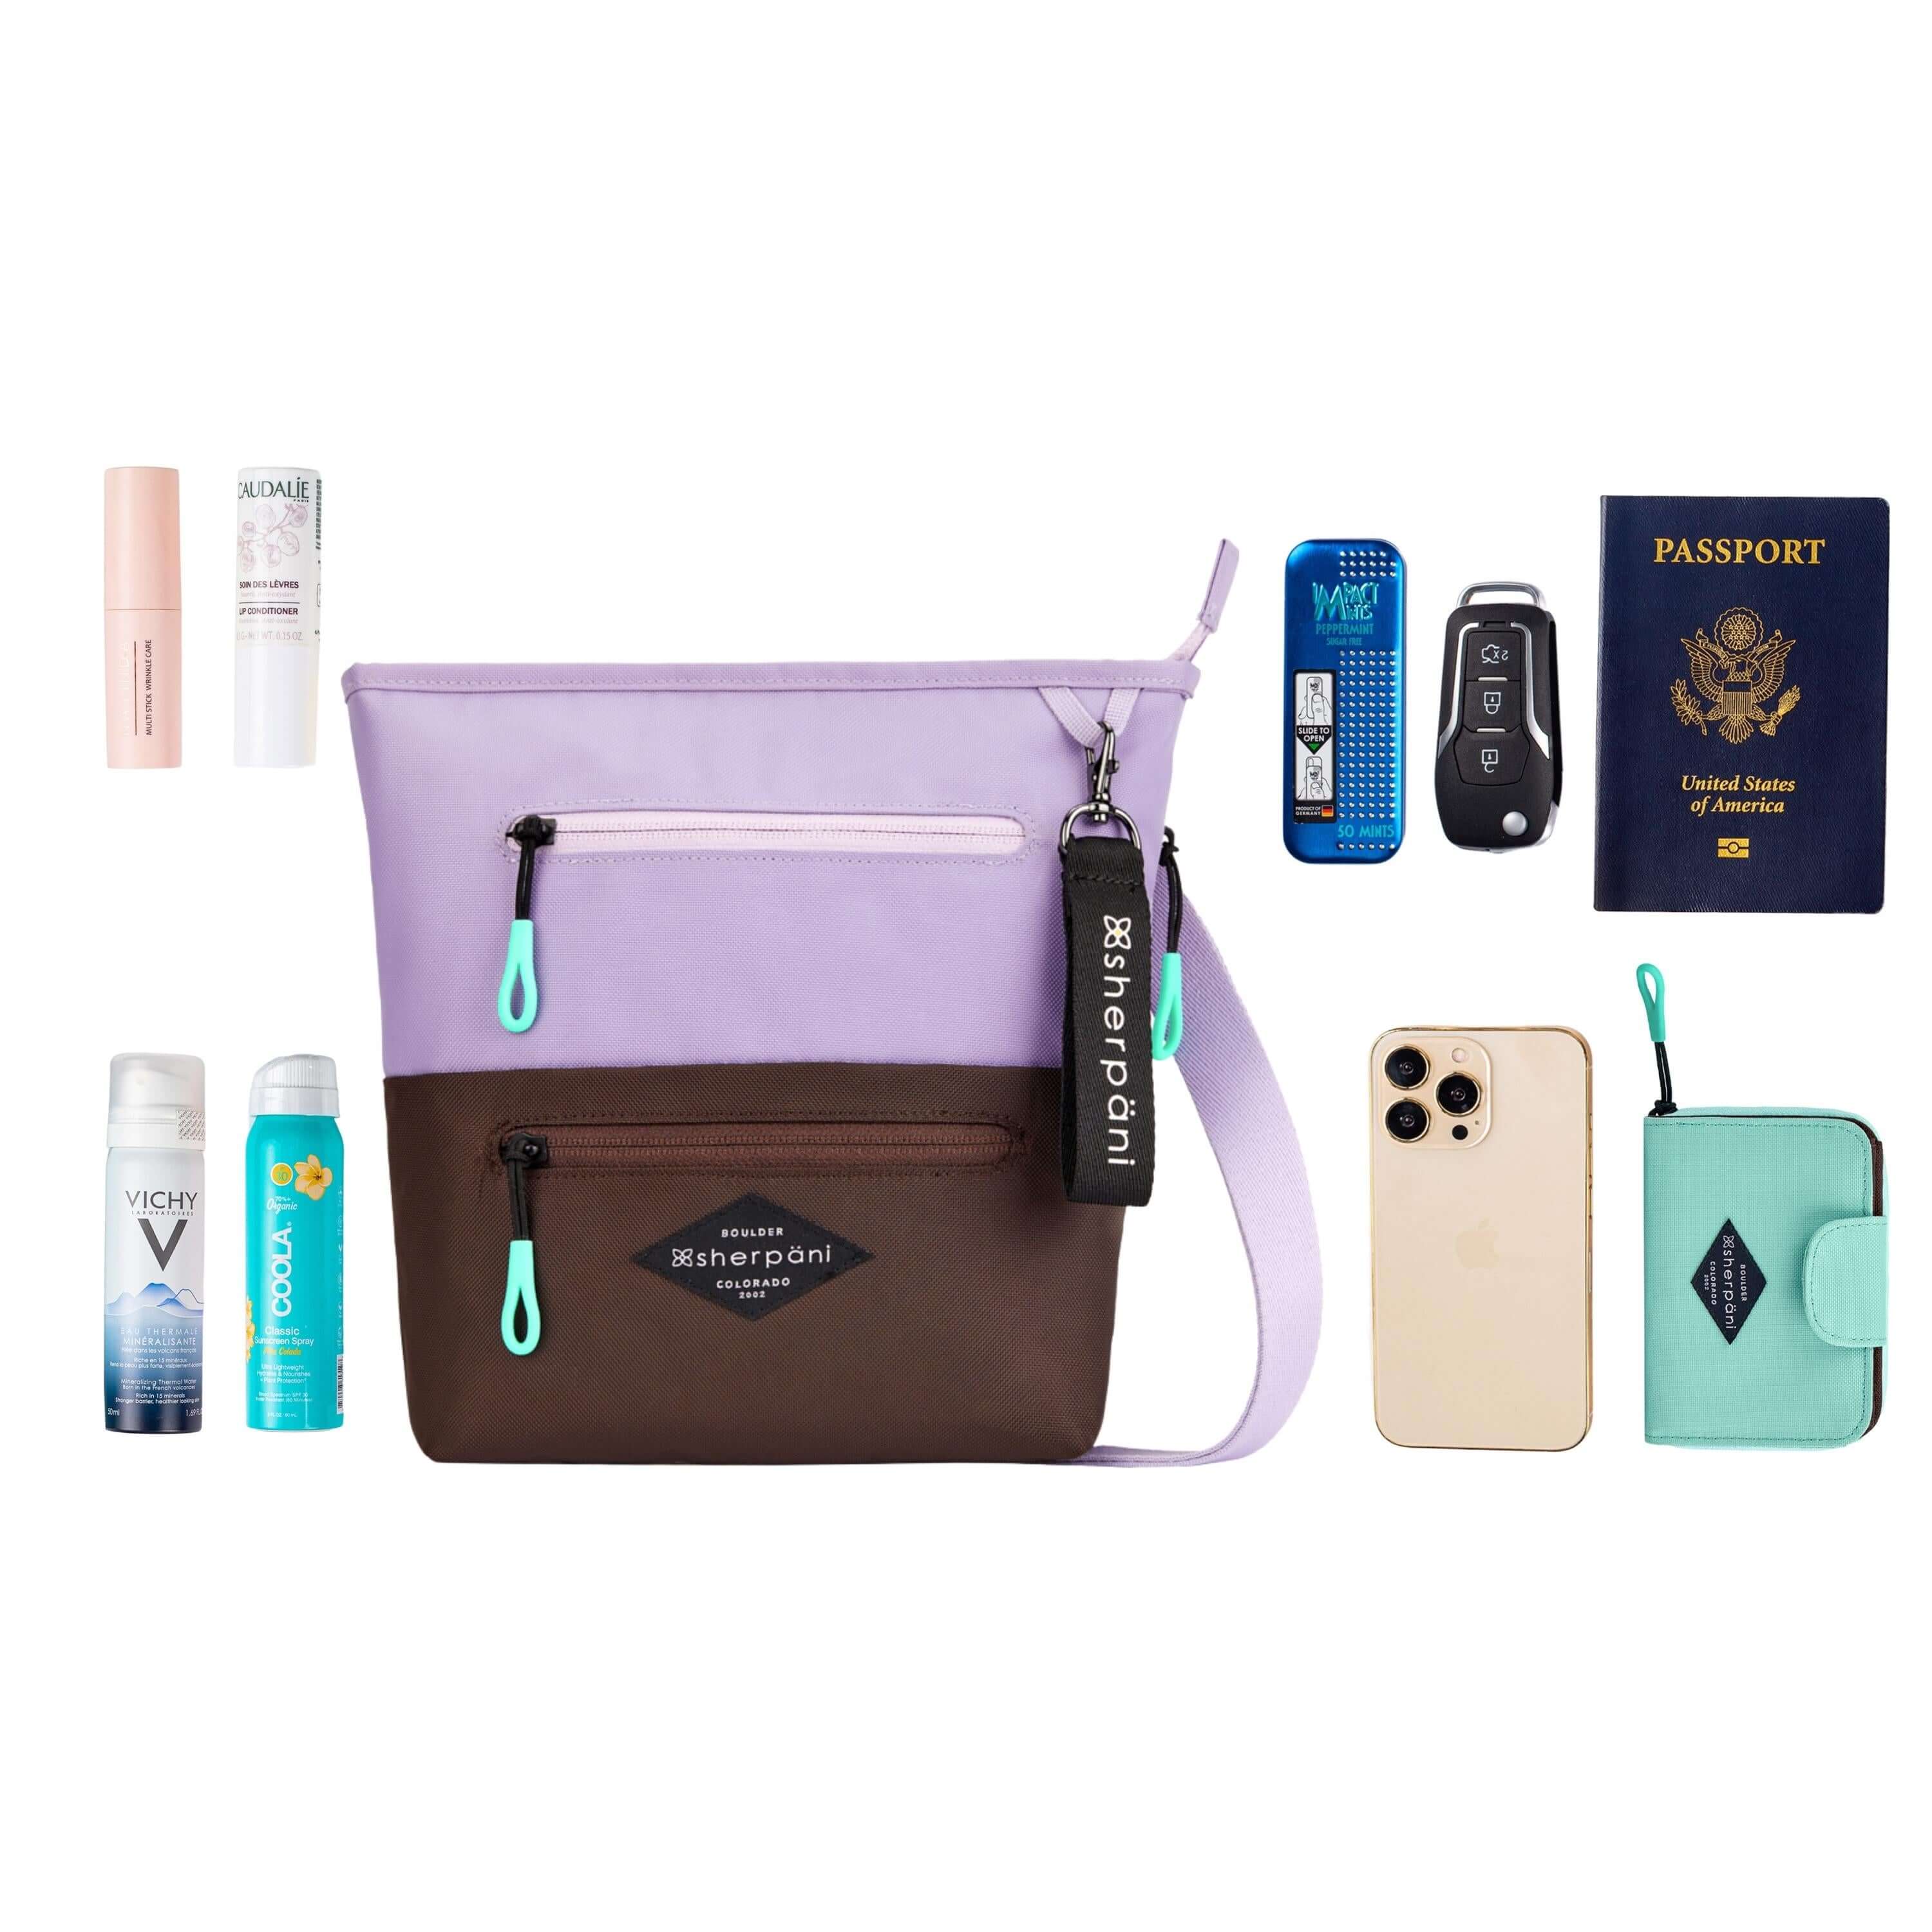 Top view of example items to fill the bag. Sherpani crossbody, the Sadie in Lavender, lies in the center. It is surrounded by an assortment of items: skincare products, sunscreen, body spray, mints, car key, passport, phone and Sherpani travel accessory the Barcelona in Seagreen.